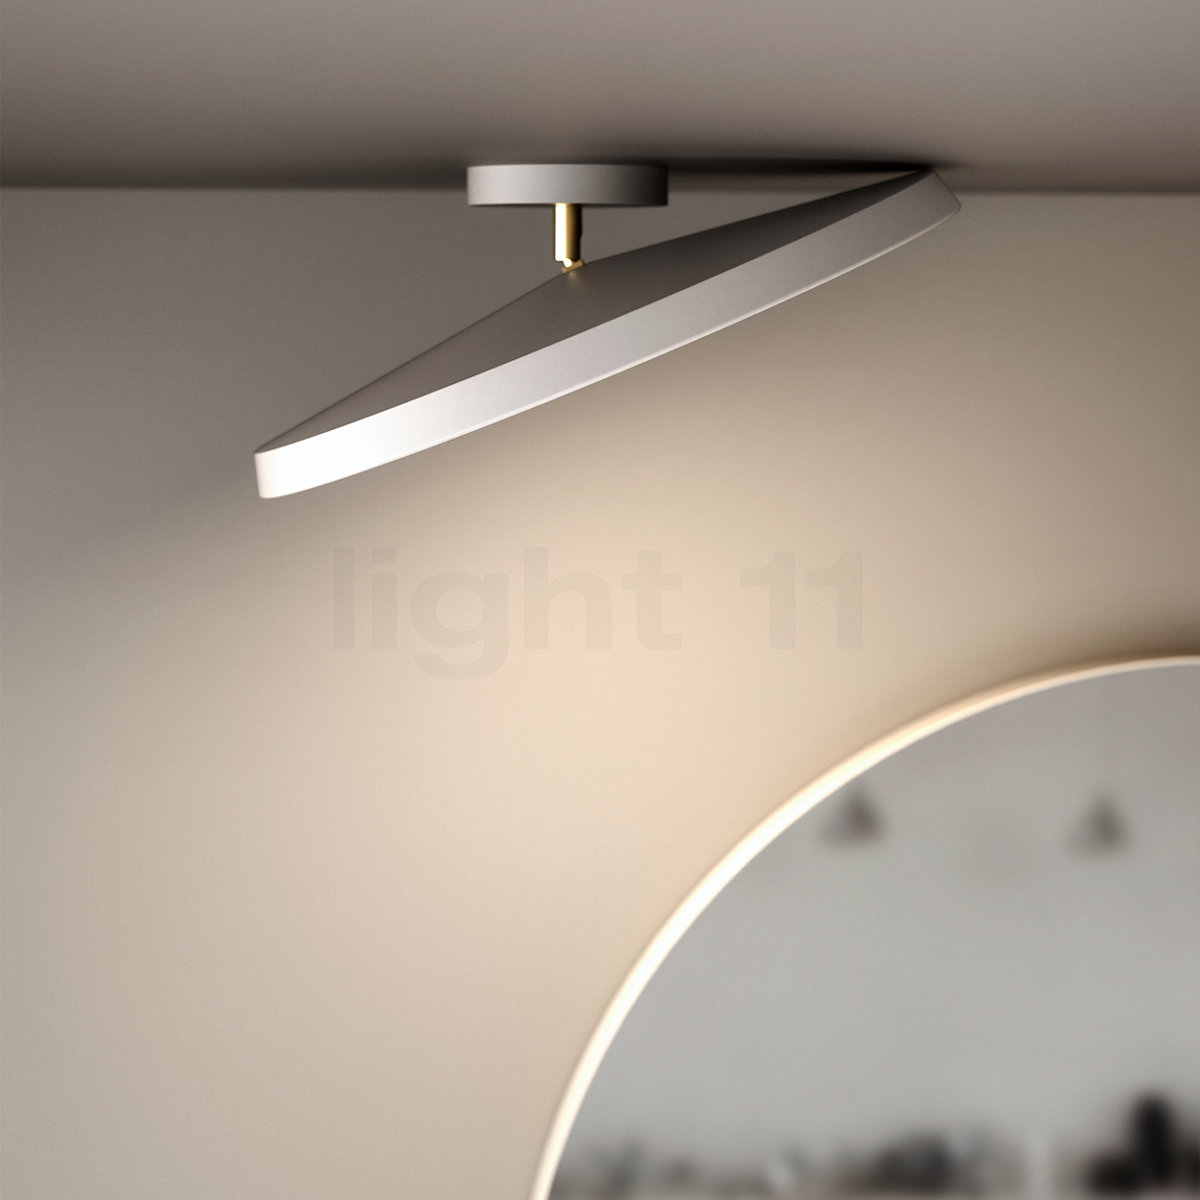 Buy Design for the Kaito Light at Pro People Ceiling LED